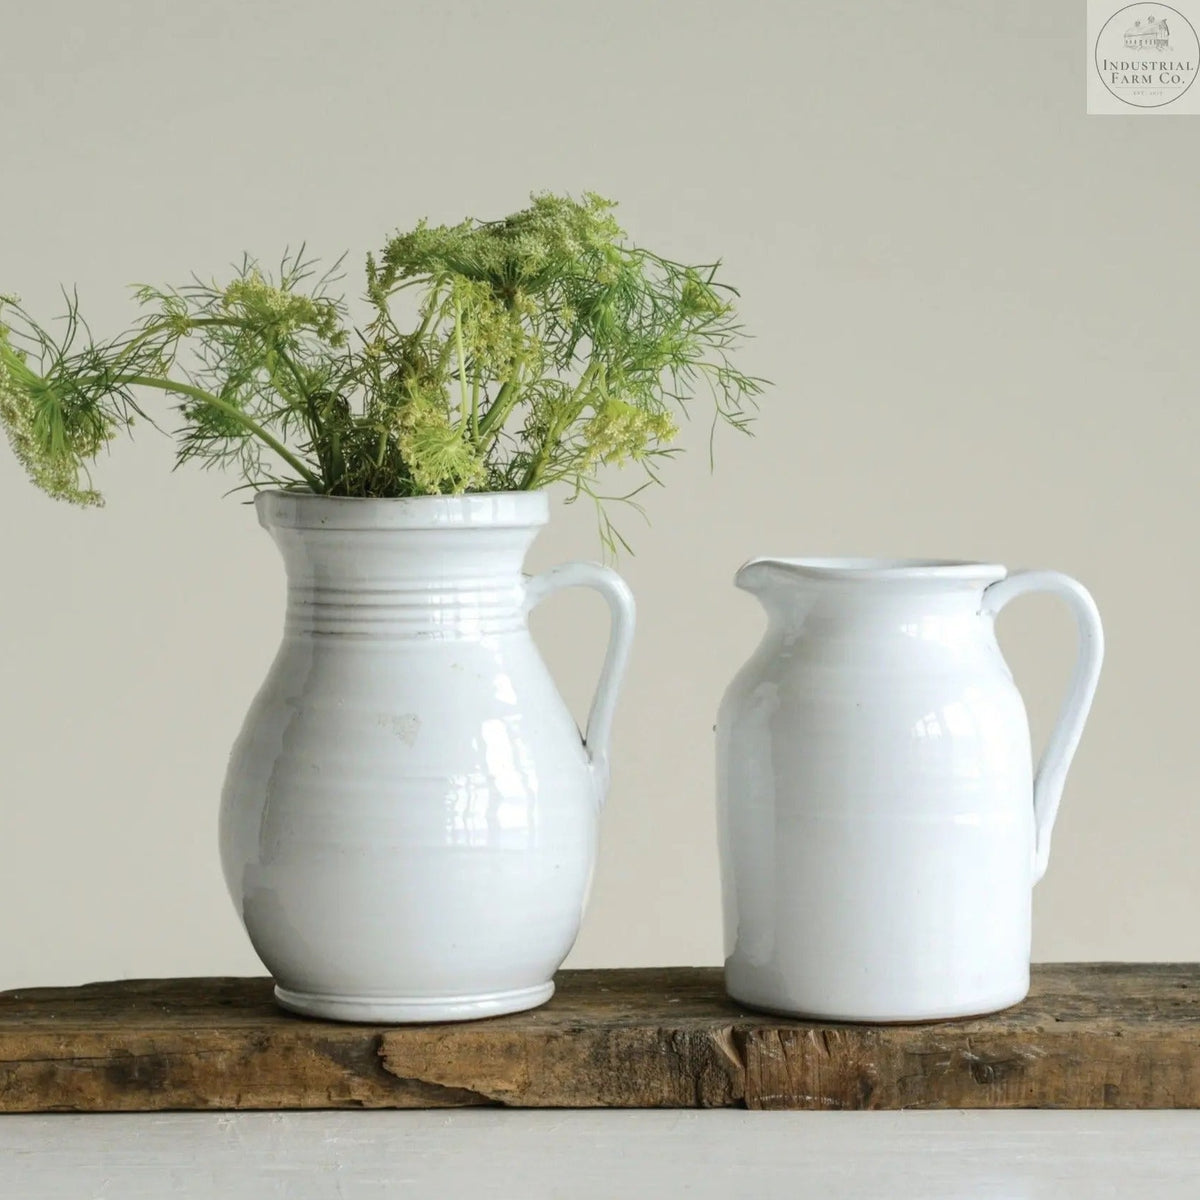 Country Style Terracotta Pitcher  Default Title   | Industrial Farm Co